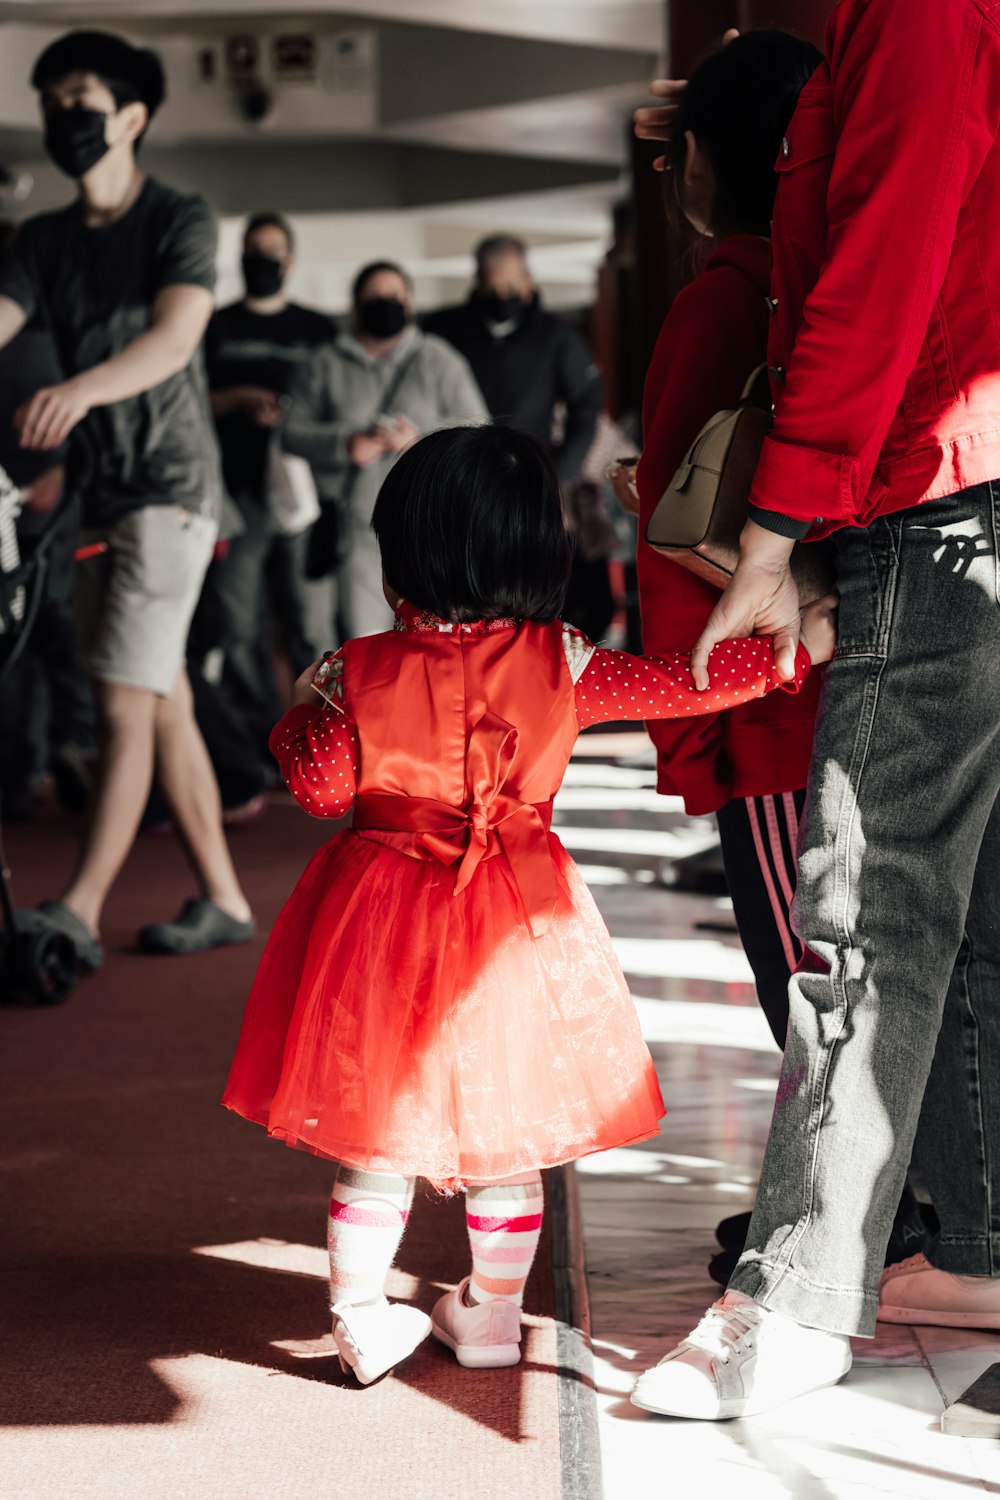 a little girl in a red dress holding hands with a man